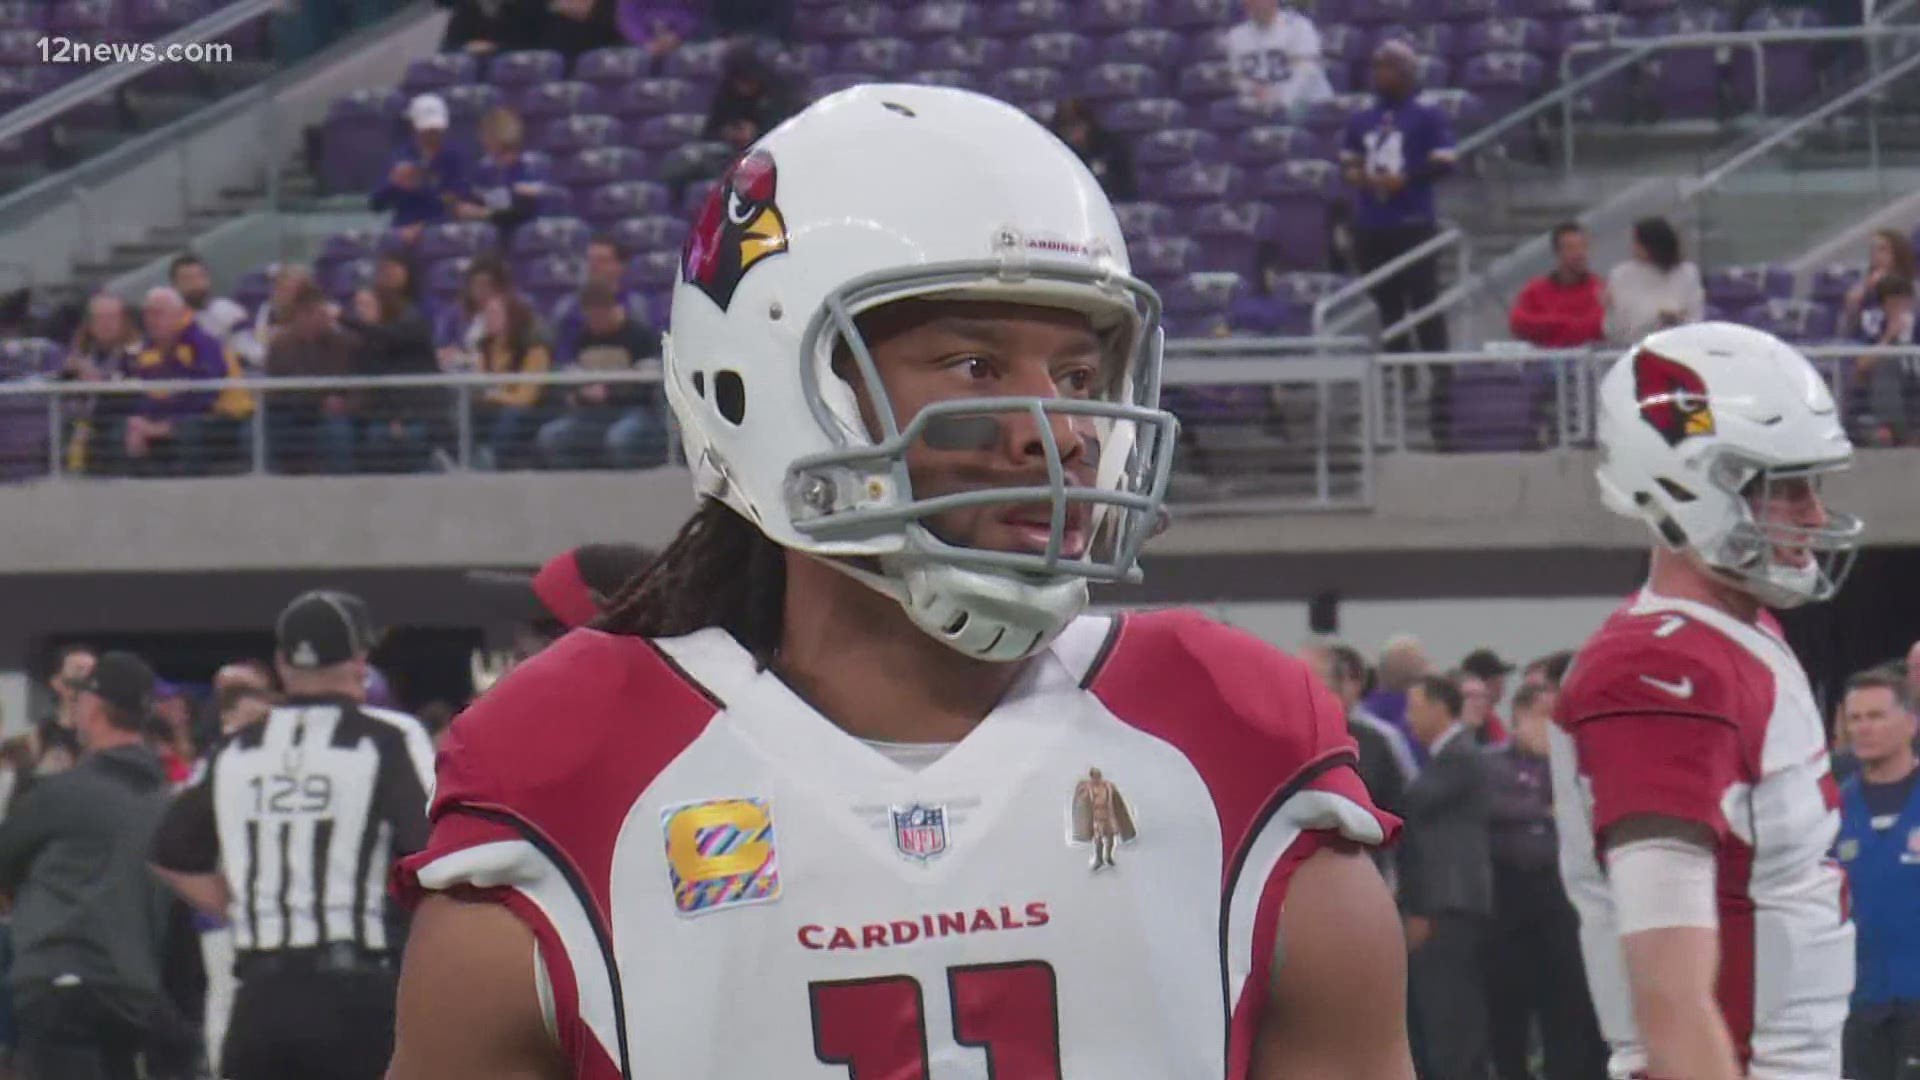 Larry Fitzgerald spoke about the death of George Floyd in his hometown and the social justice climate as well as conversations he's been having with his son.